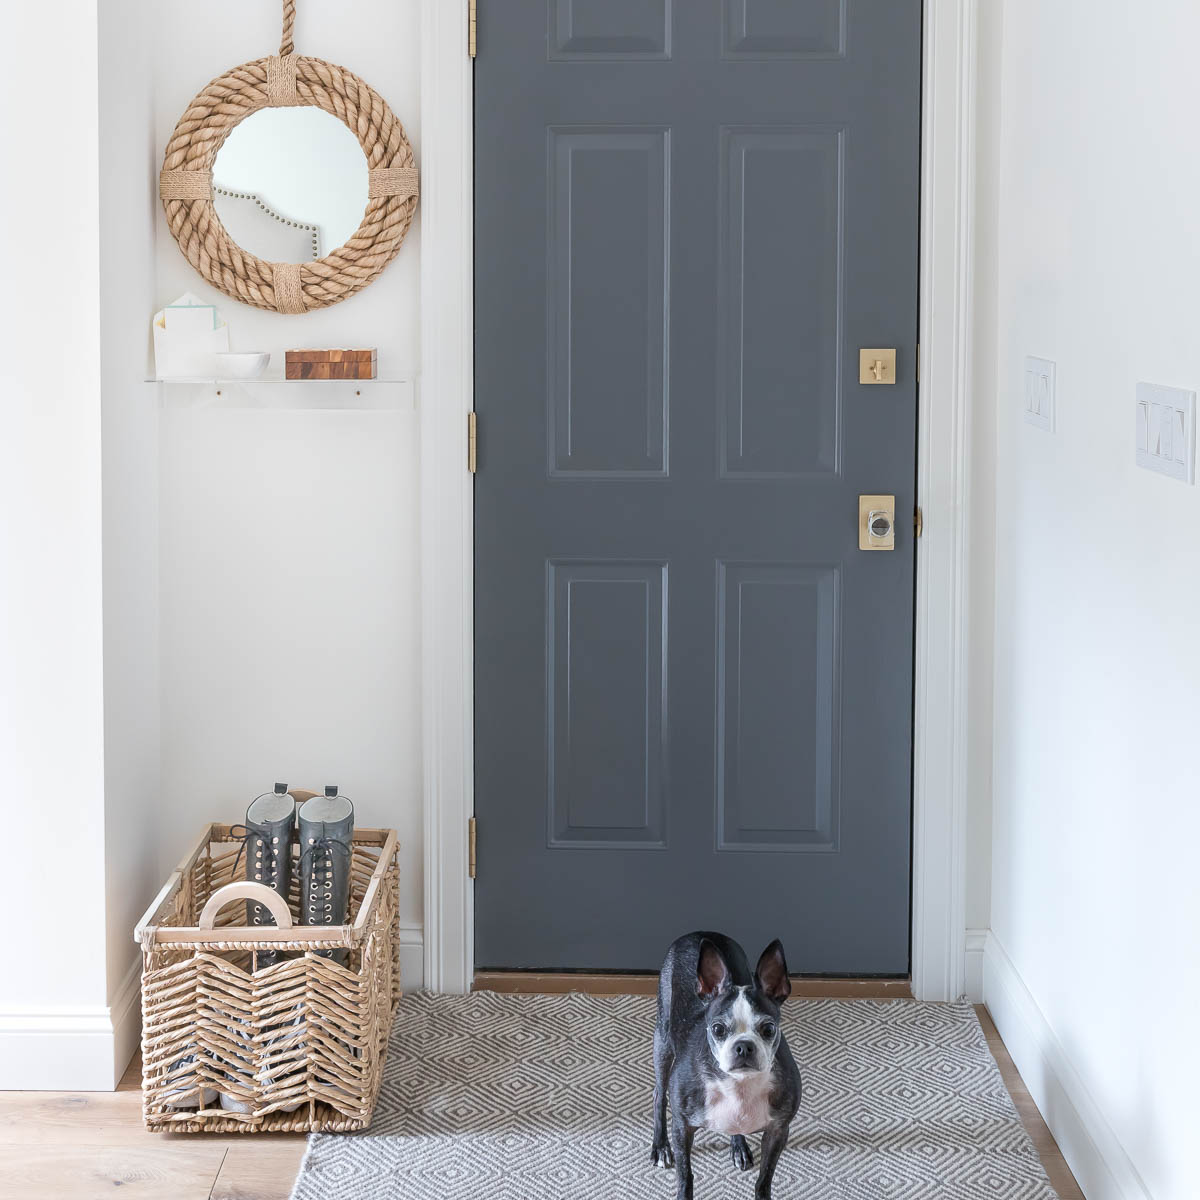 Garage Entryway Ideas From Our Makeover! - Driven by Decor